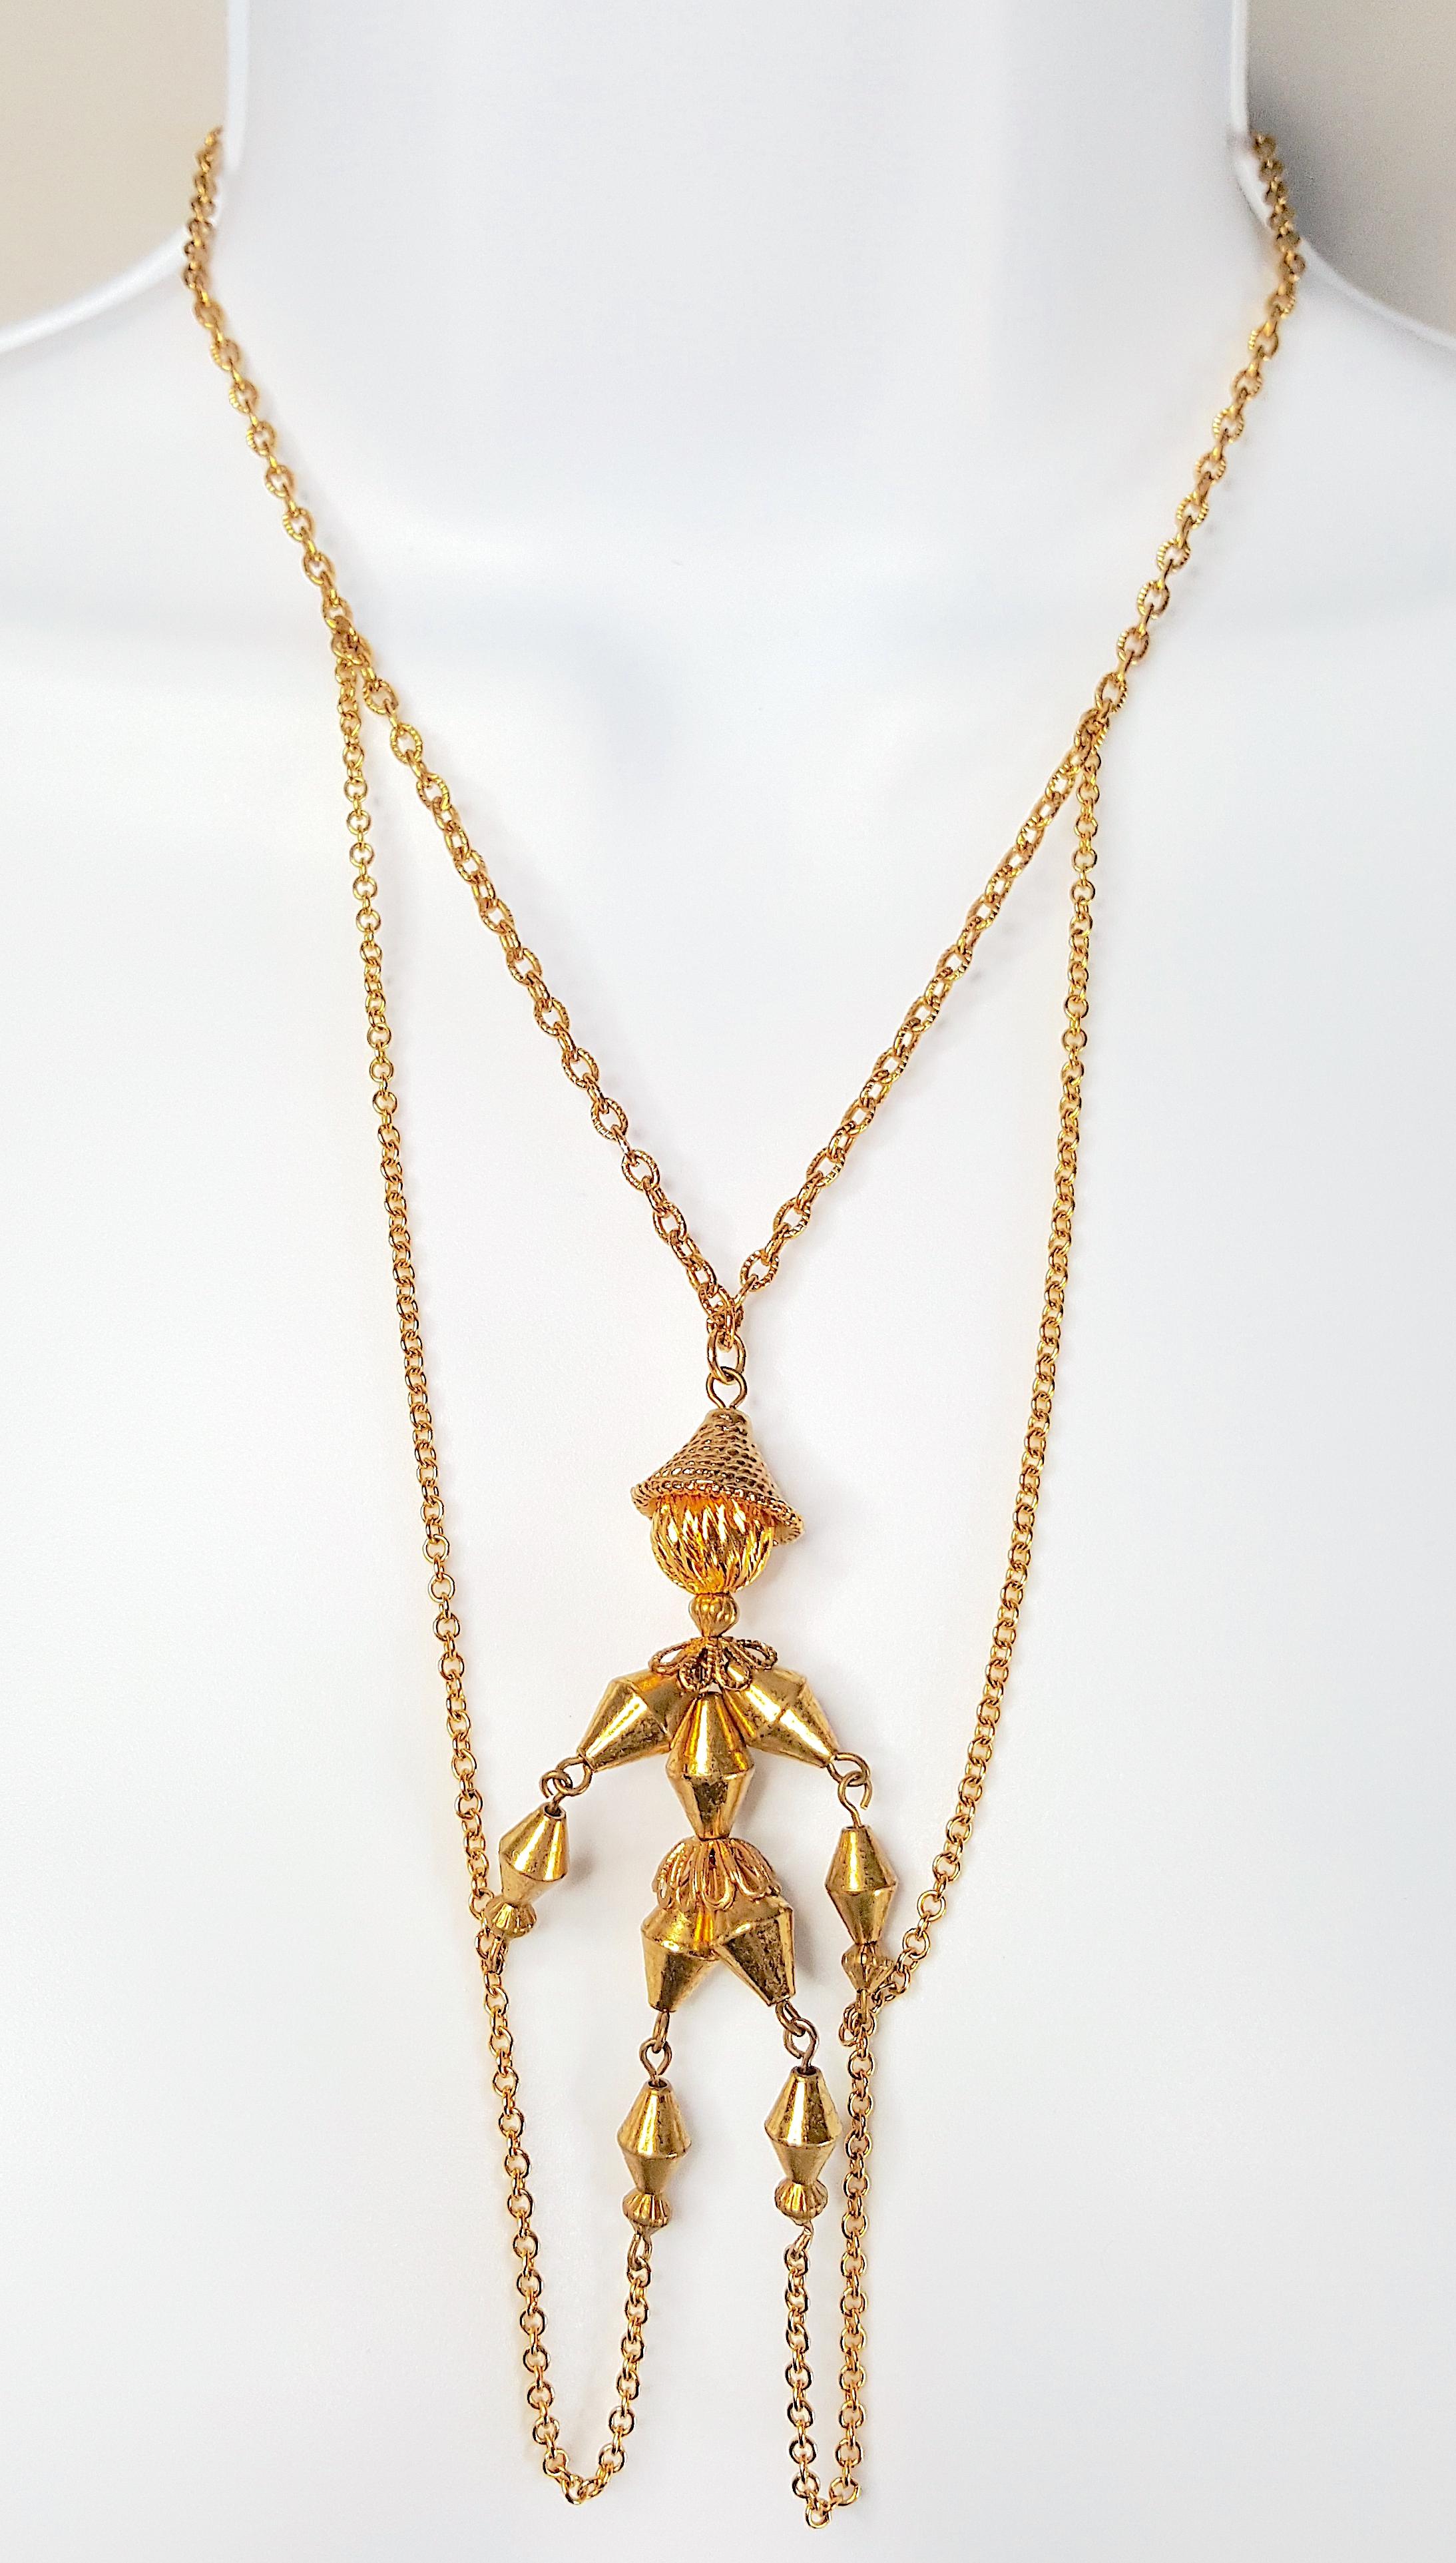 Women's or Men's KineticPuppetStringsPinocchio GoldTexturedChainLink3Strand Early20thC. Necklace For Sale